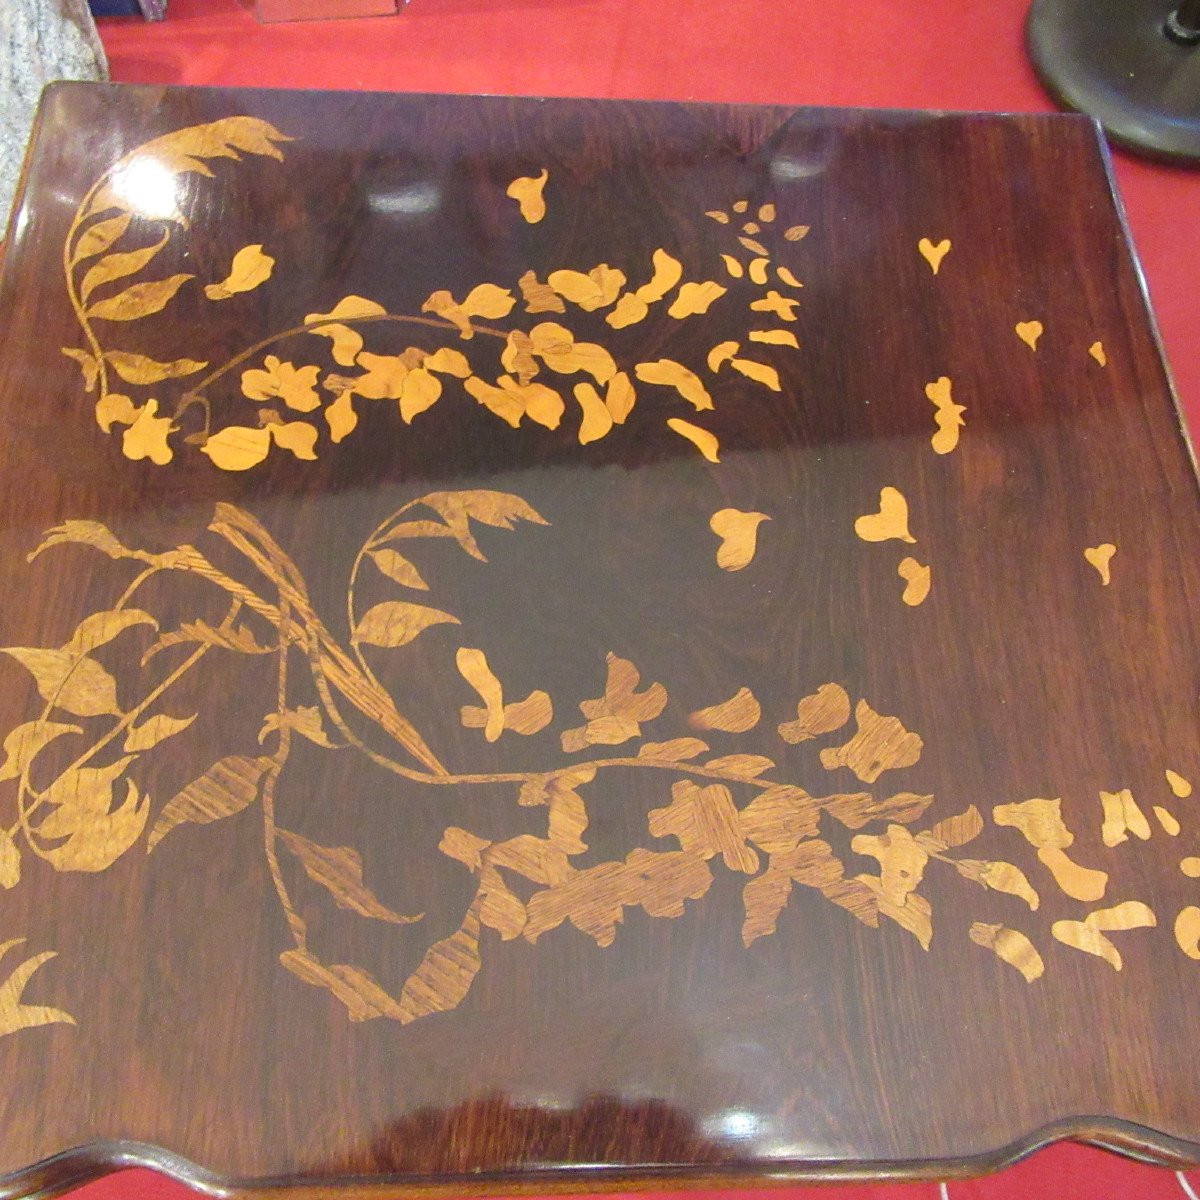 Games Table Signed Gallé In Rosewood In Excellent Condition. Art Nouveau Period-photo-4